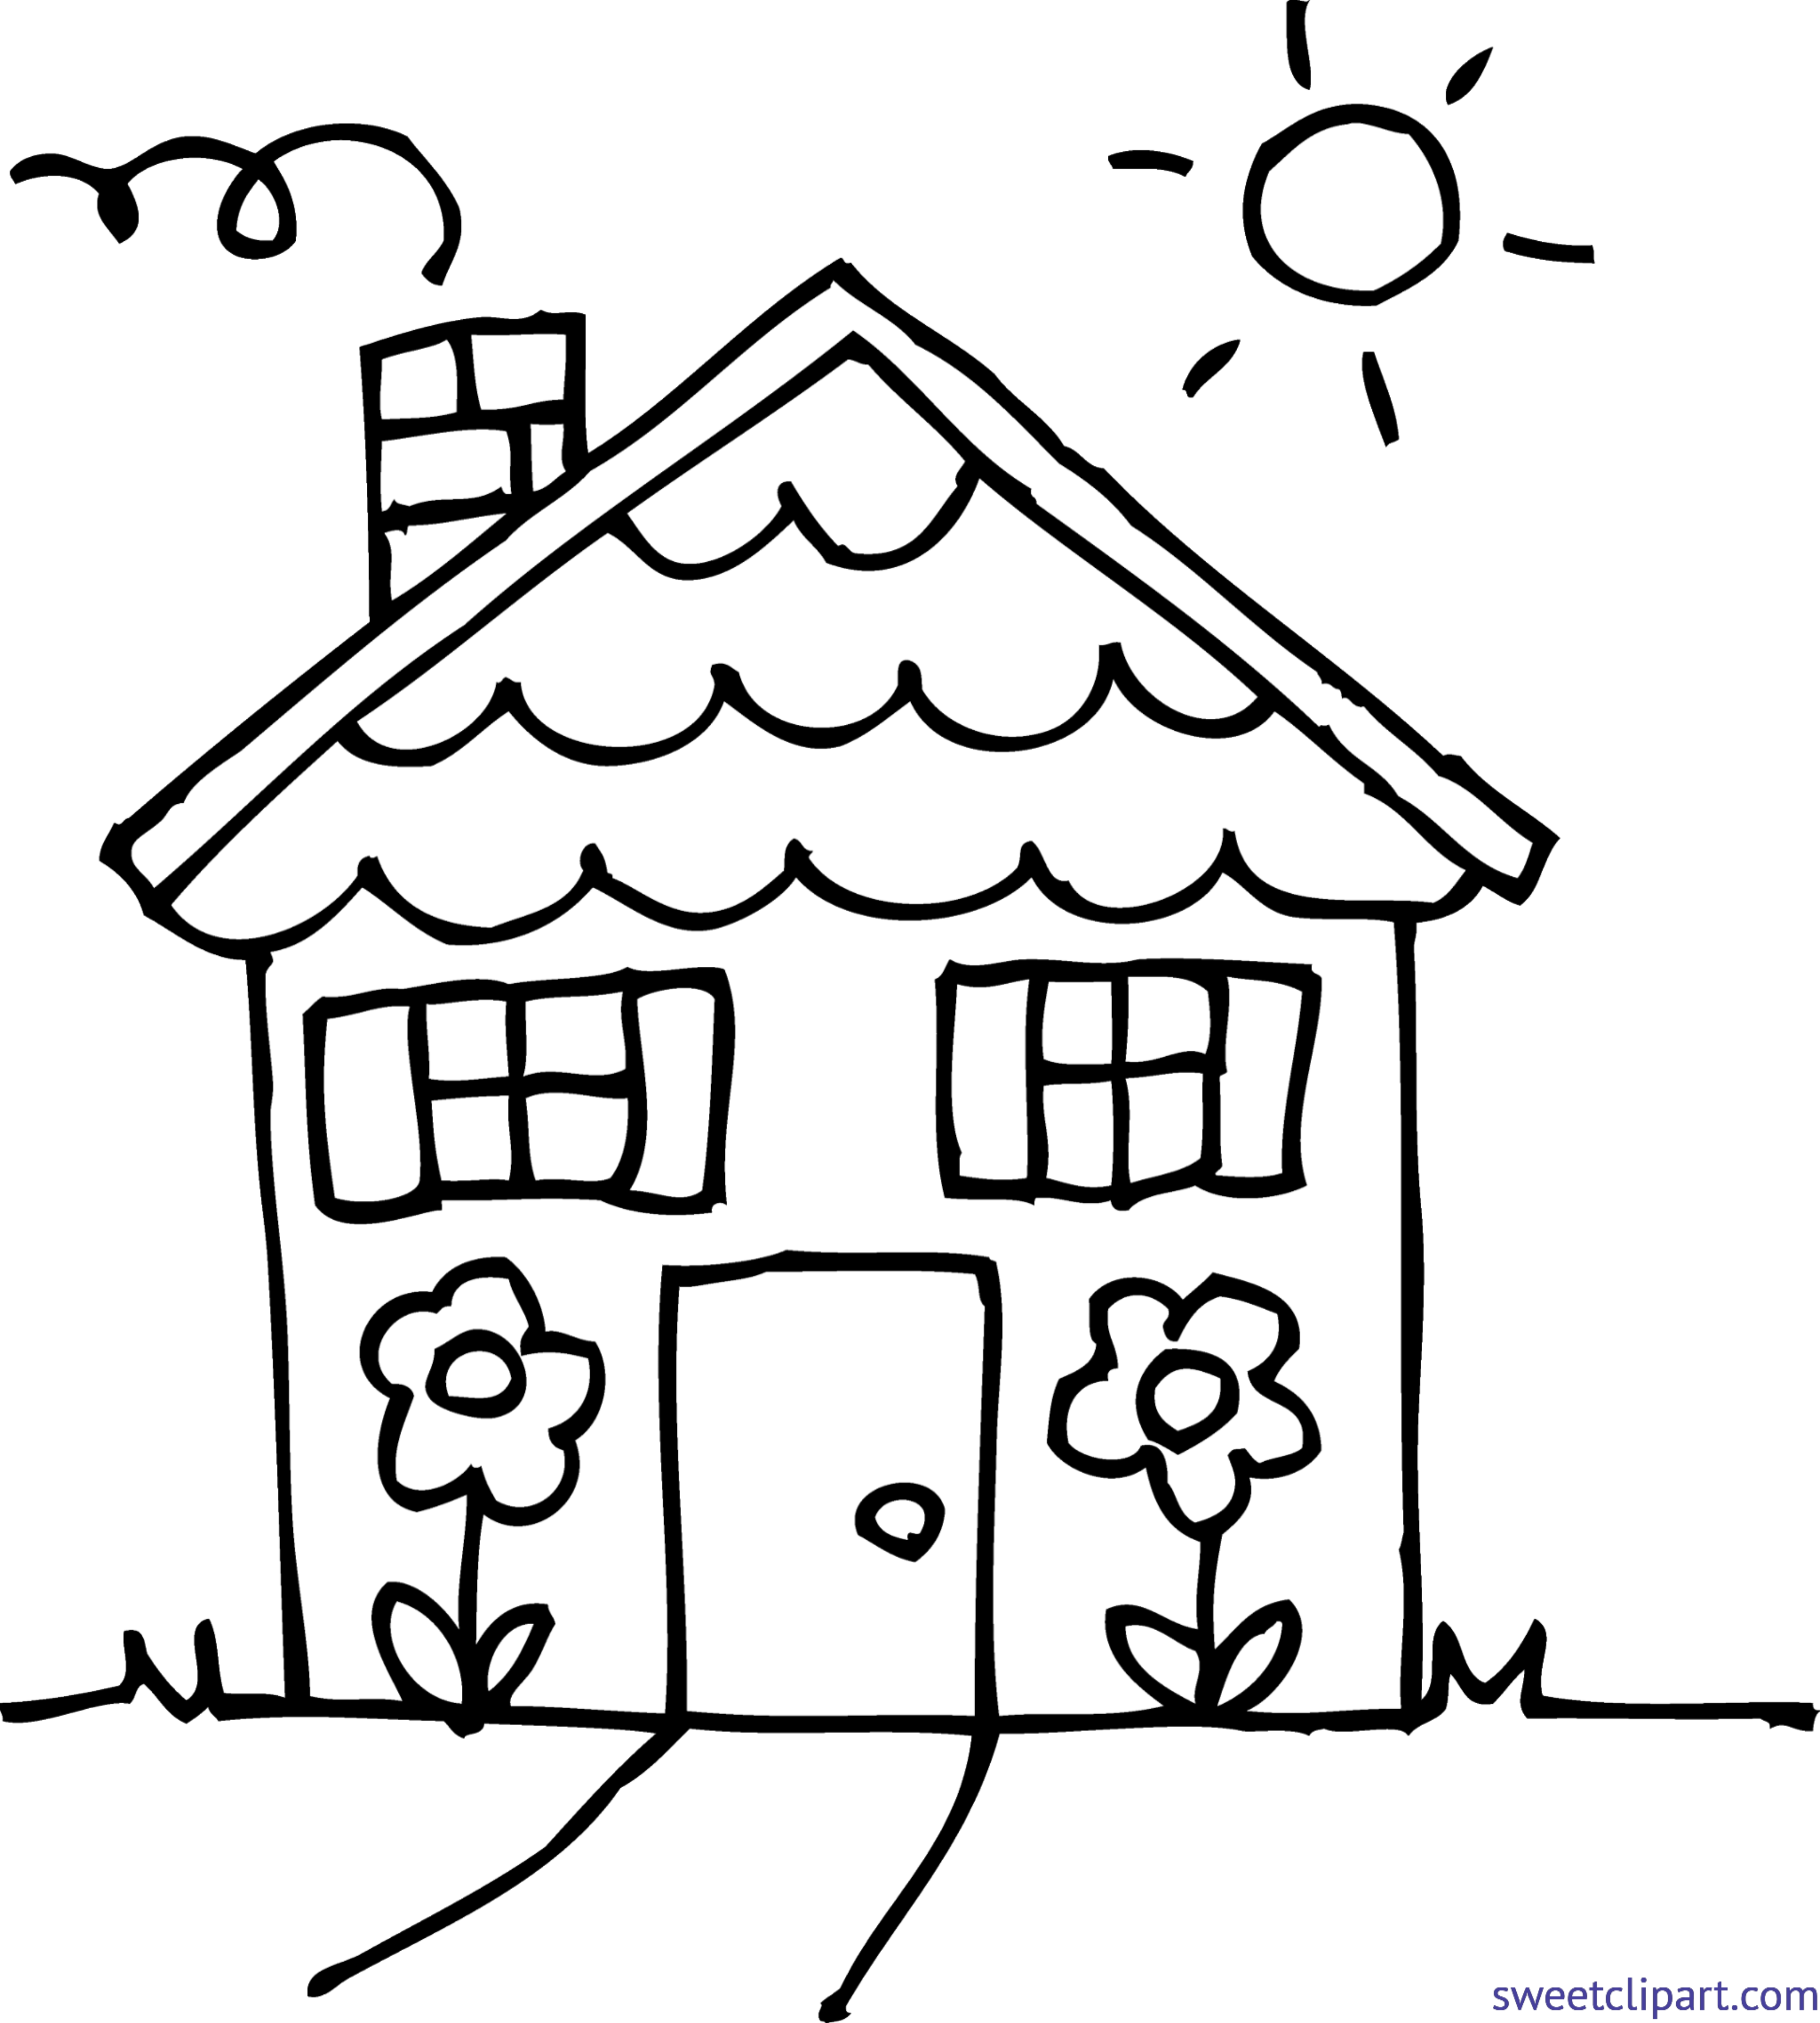 House line drawing clip. Hut clipart simple cartoon